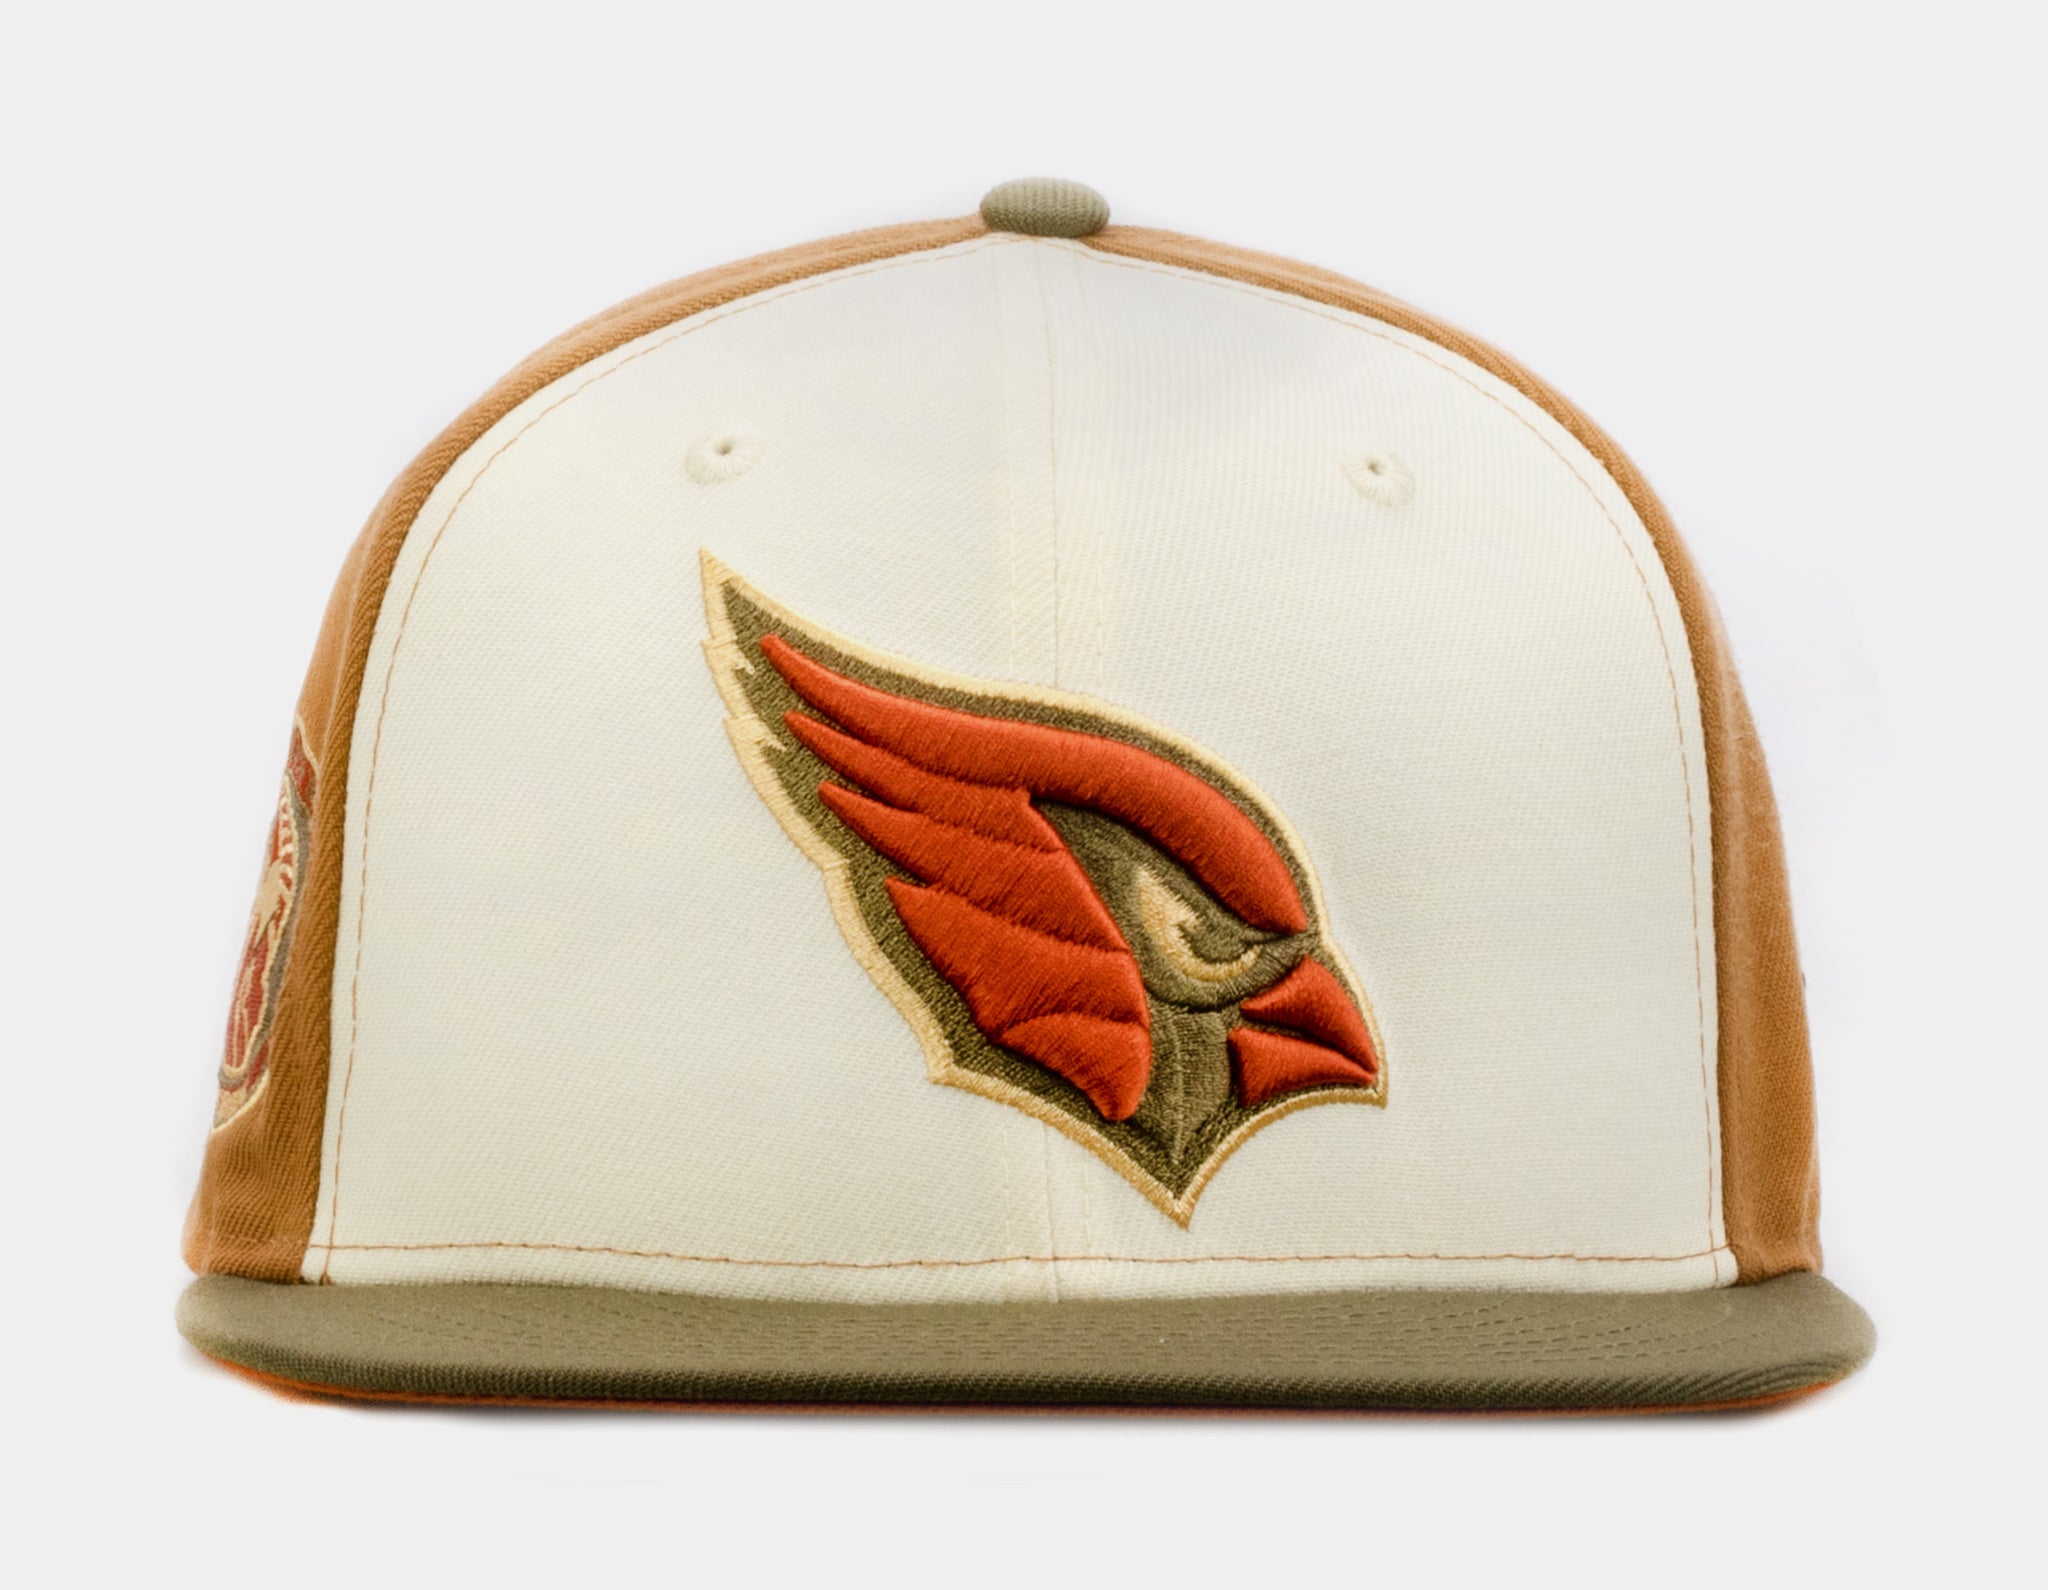 Men's New Era Arizona Cardinals White on White 59FIFTY Fitted Hat